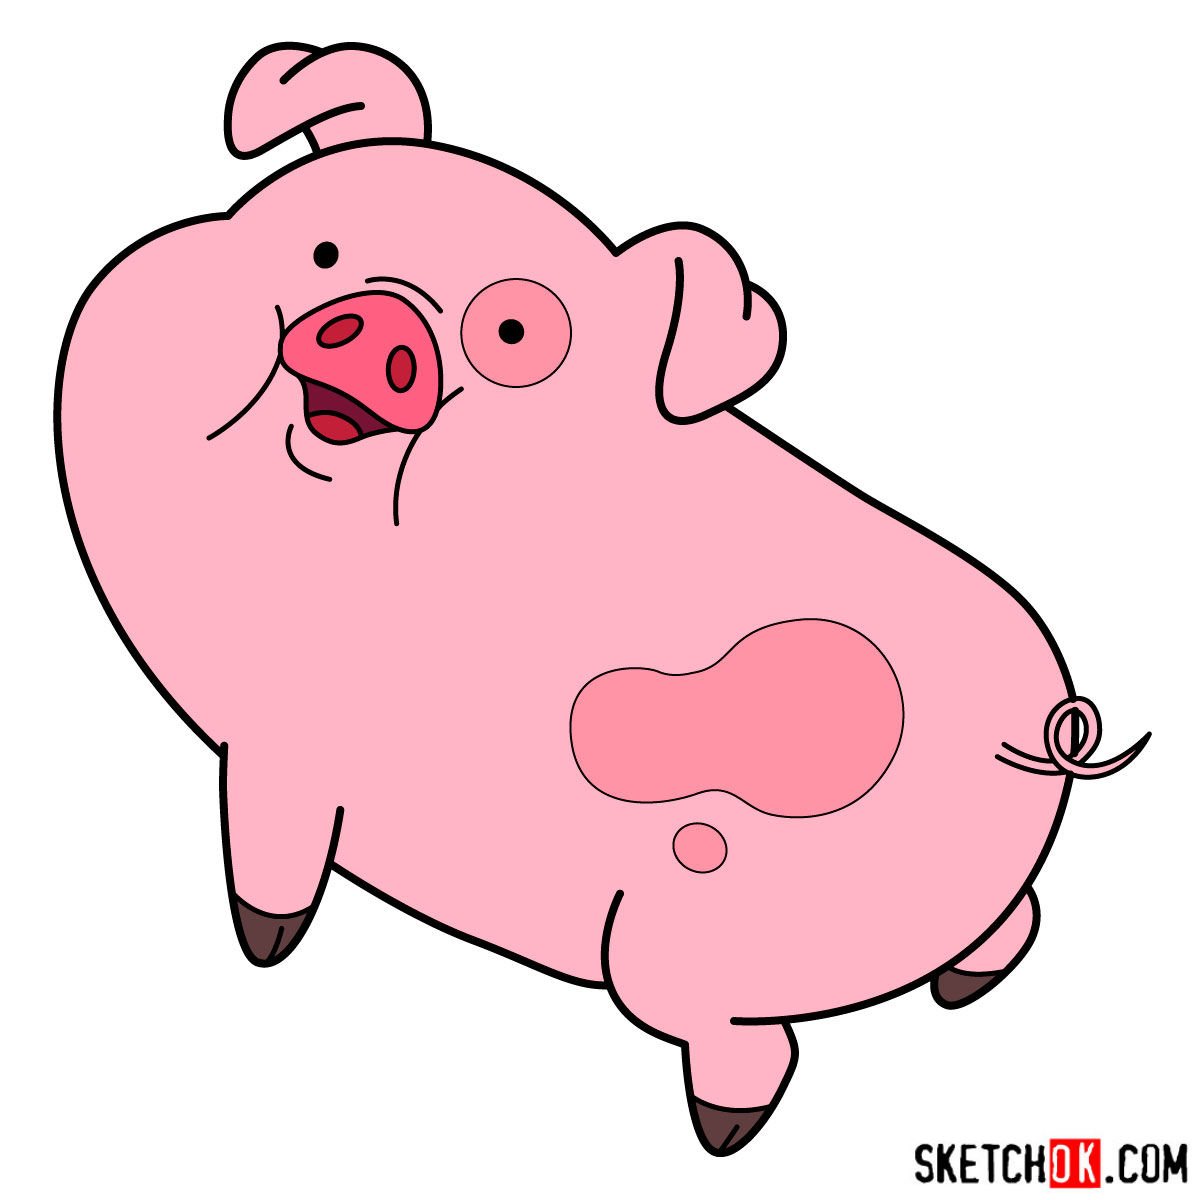 How to draw Waddles the pig